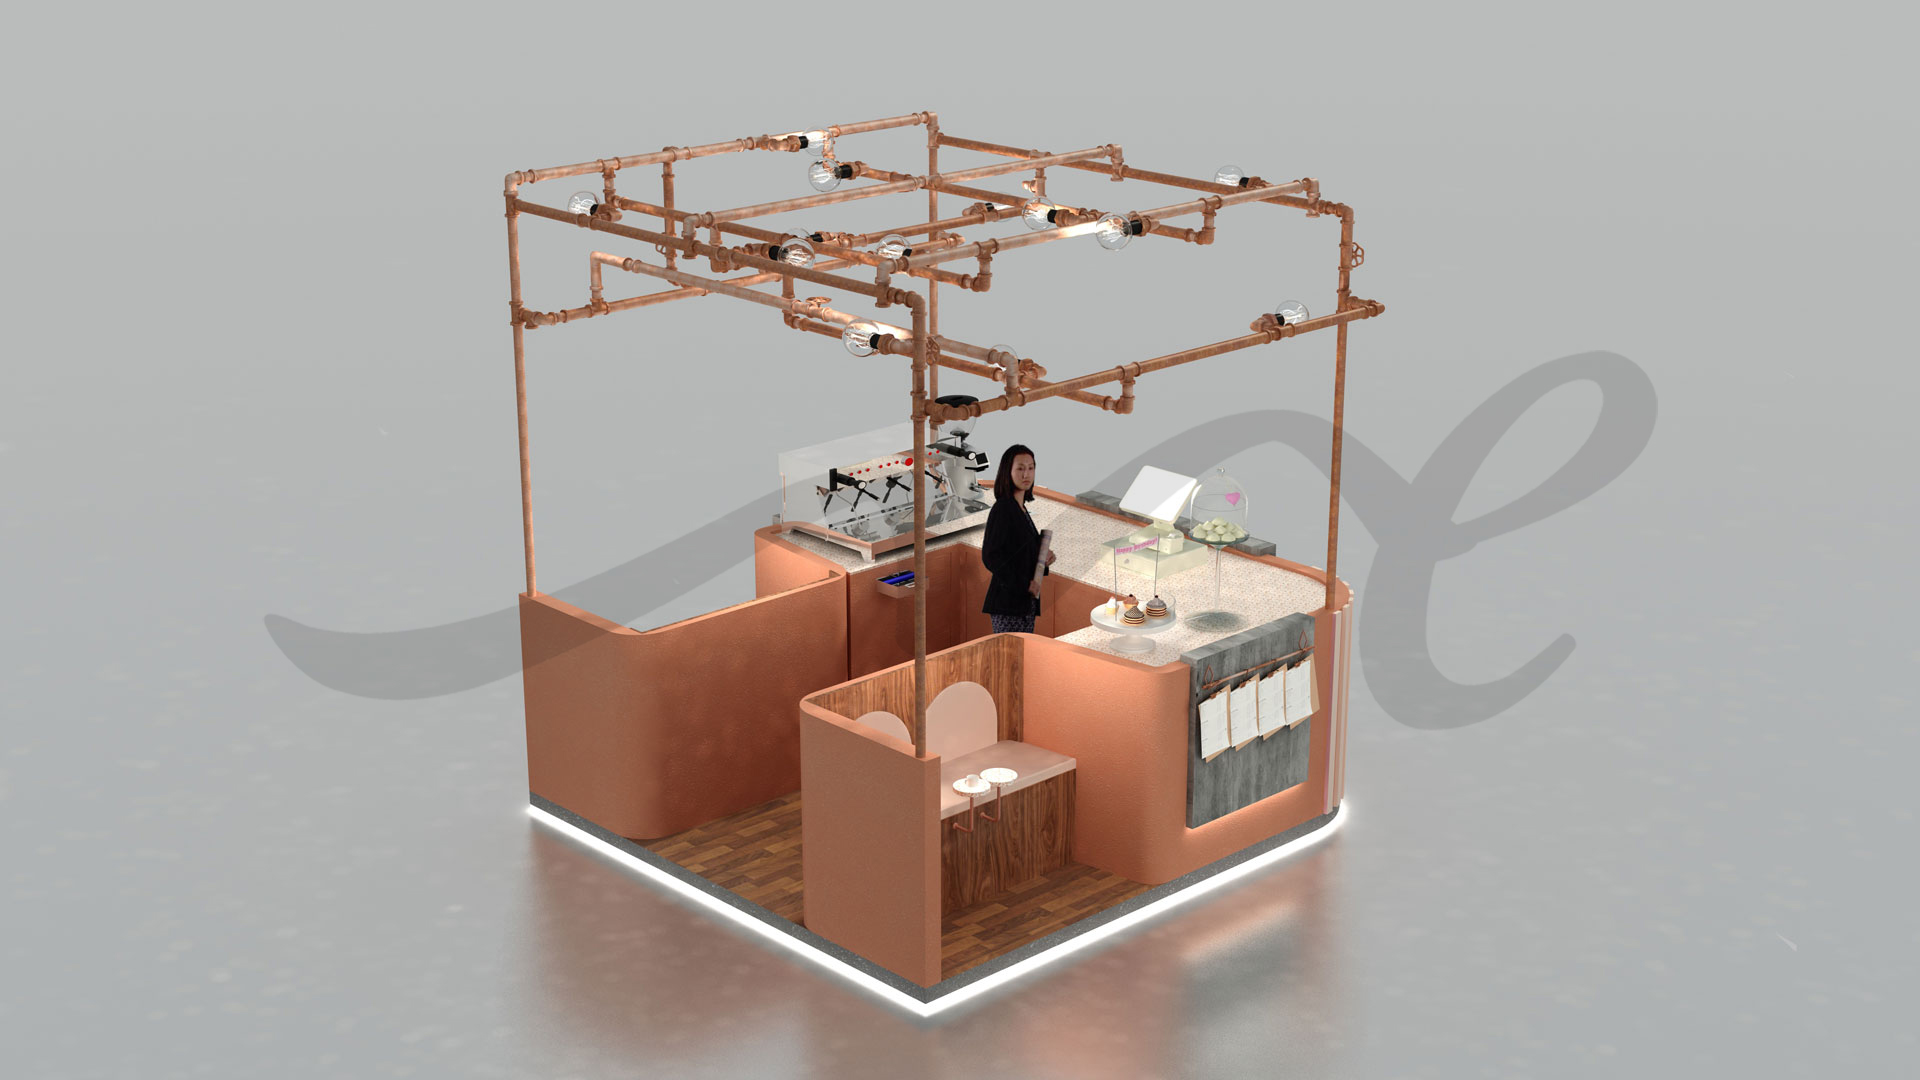 3D Design of a Coffee Kiosk for 2 Côtés made by ME Visual